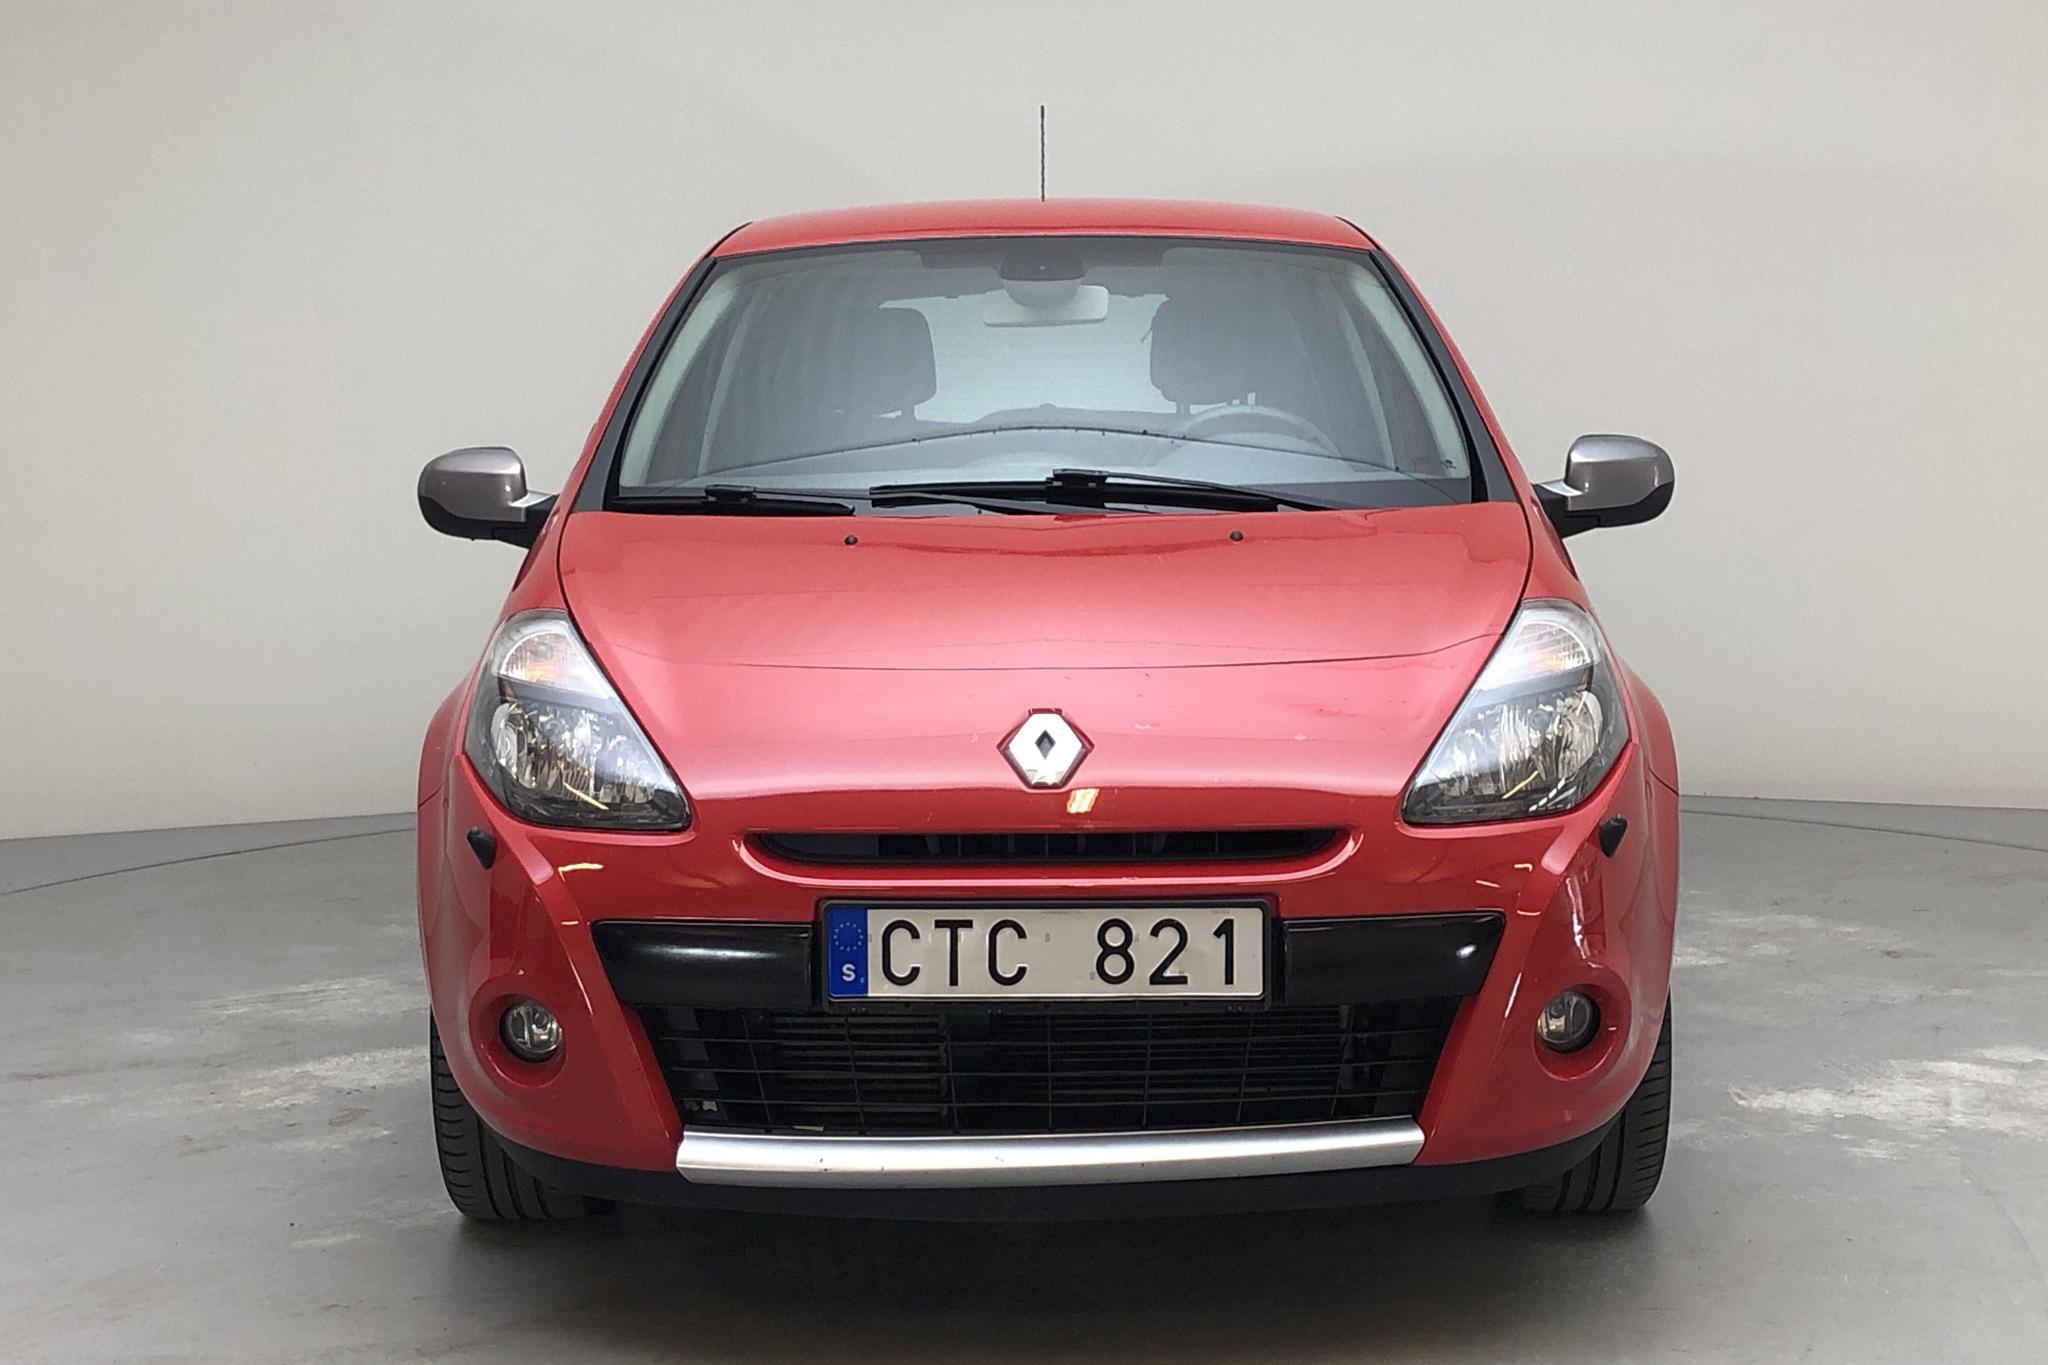 Renault Clio III 1.5 dCi 5dr (88hk) - 66 970 km - Manual - red - 2012